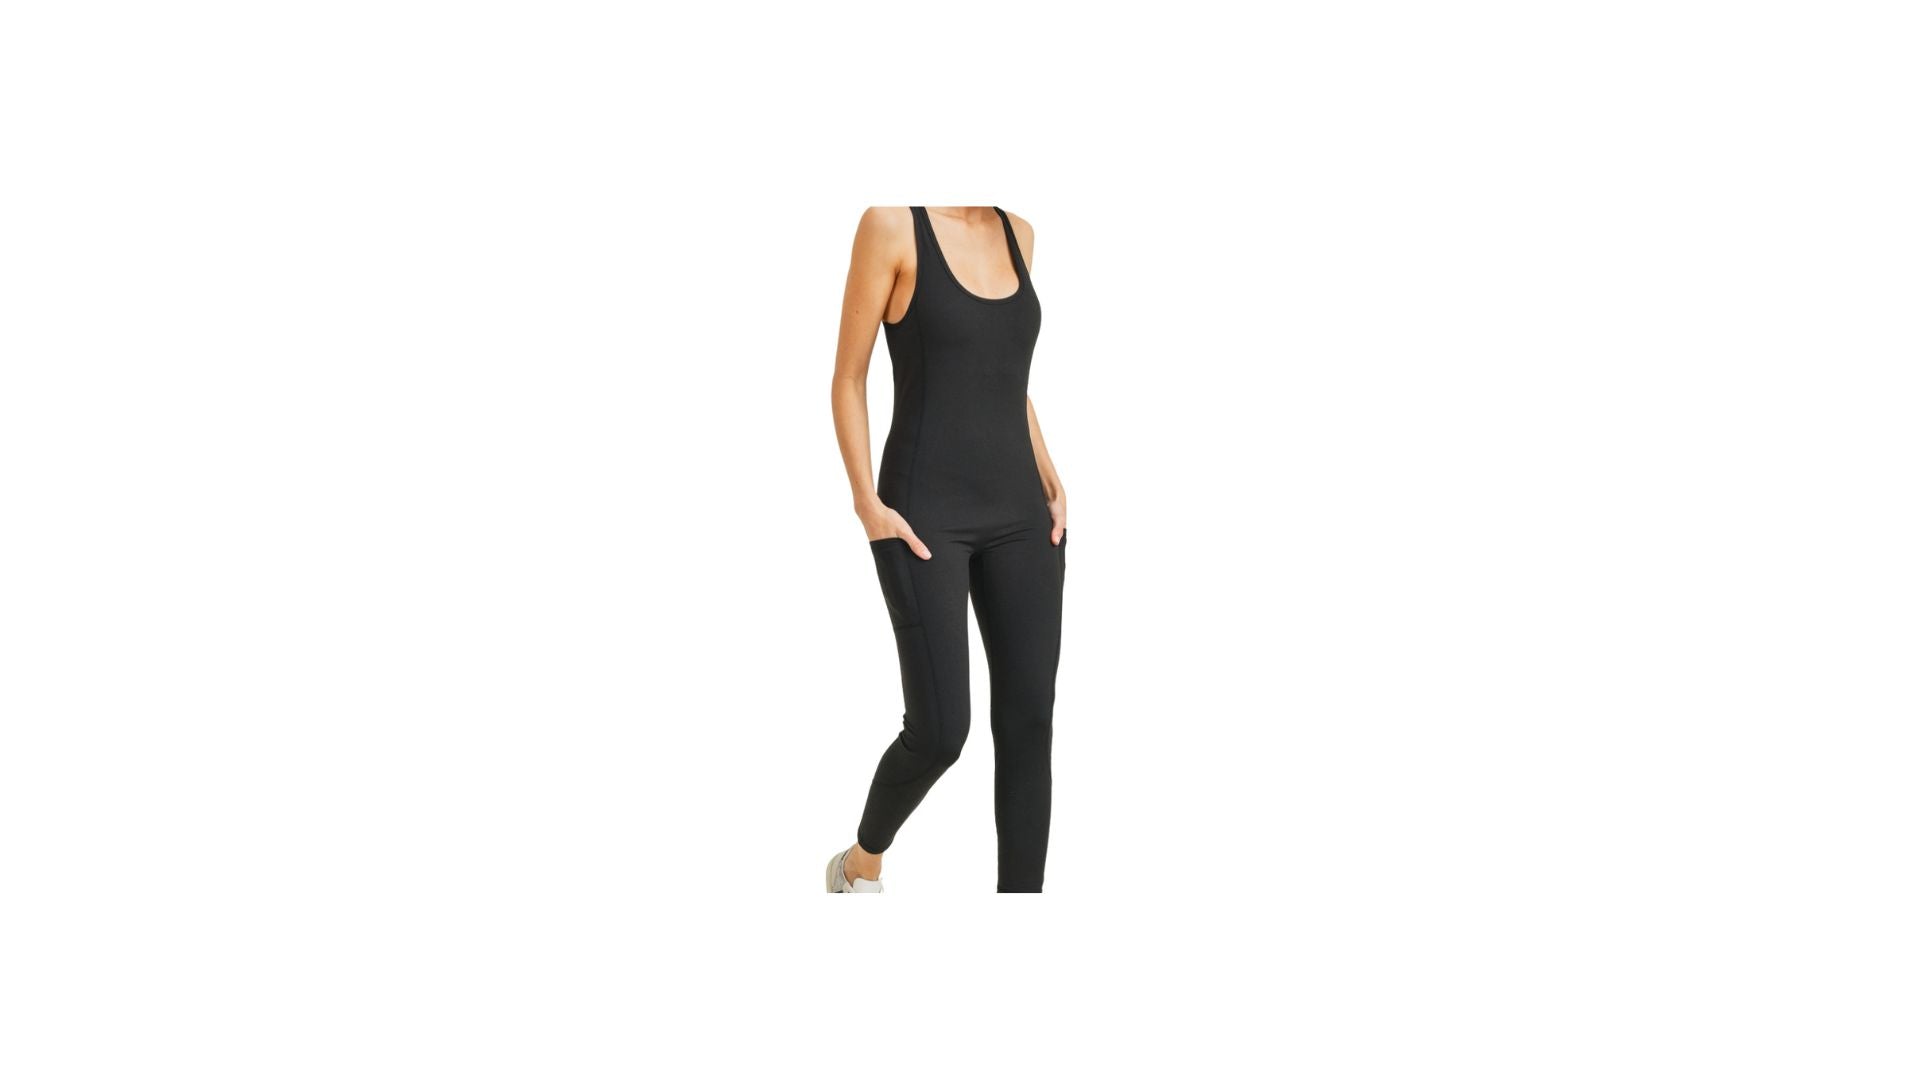 Mono B / Mono B Plus
<meta charset="utf-8">
<div style="text-align: center;"><em><strong>Great performance fitness apparel needs to look functional whilst serving as fashion expression of oneself.</strong></em></div>

Le' Diva Boutique Store